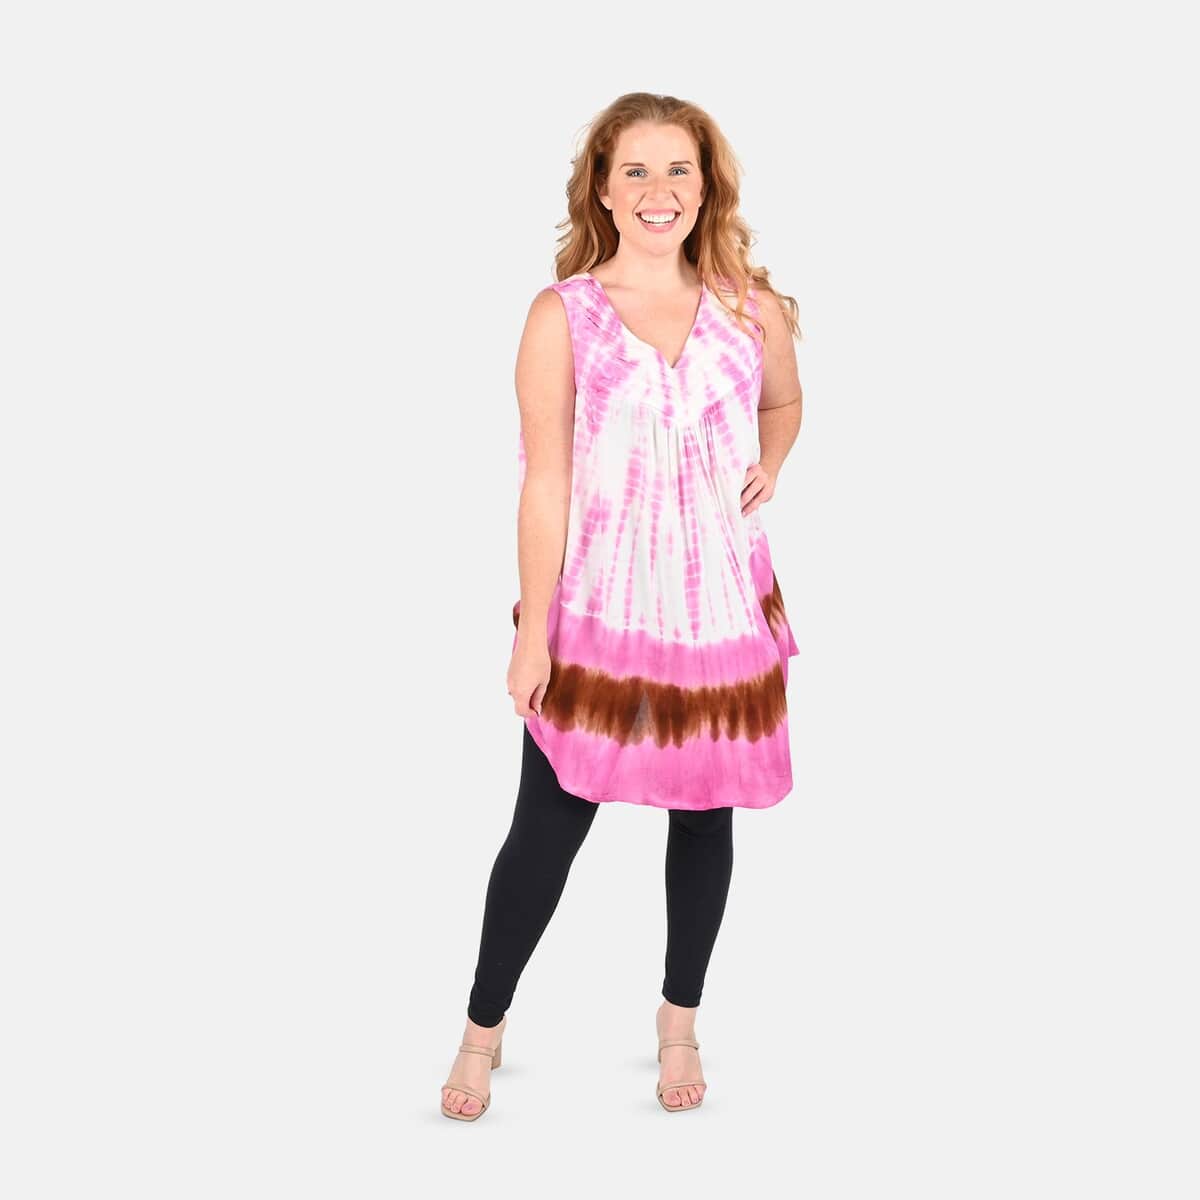 TAMSY Pink Tie Dye Tunic - One Size Fits Most image number 0